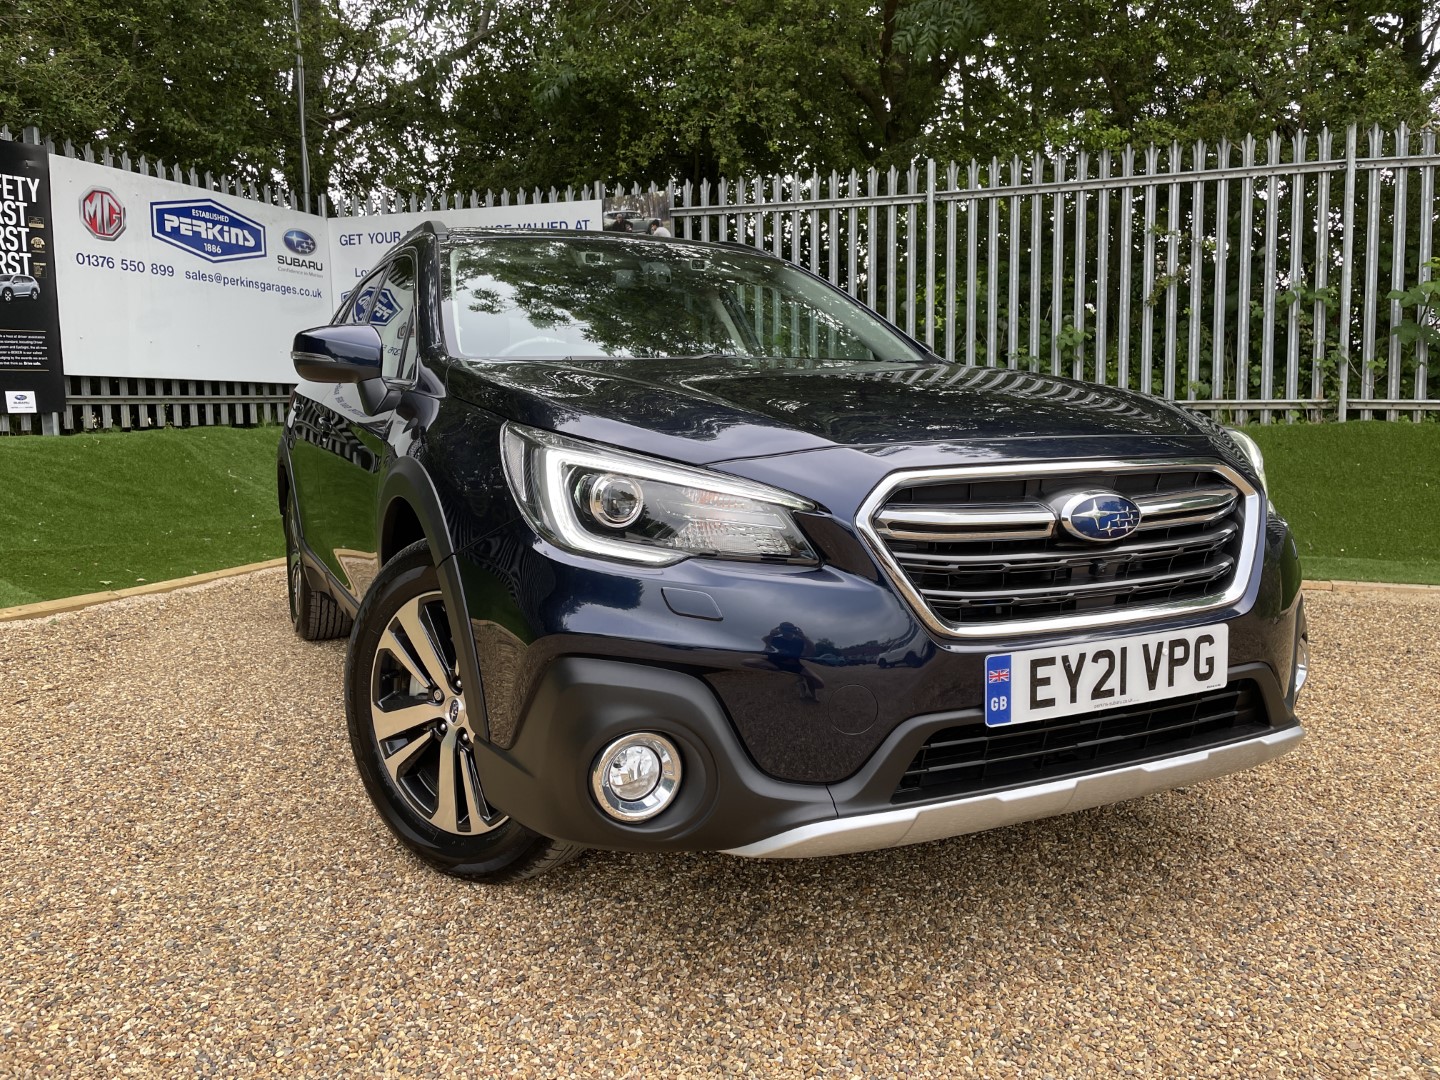 Subaru Outback for sale discounted